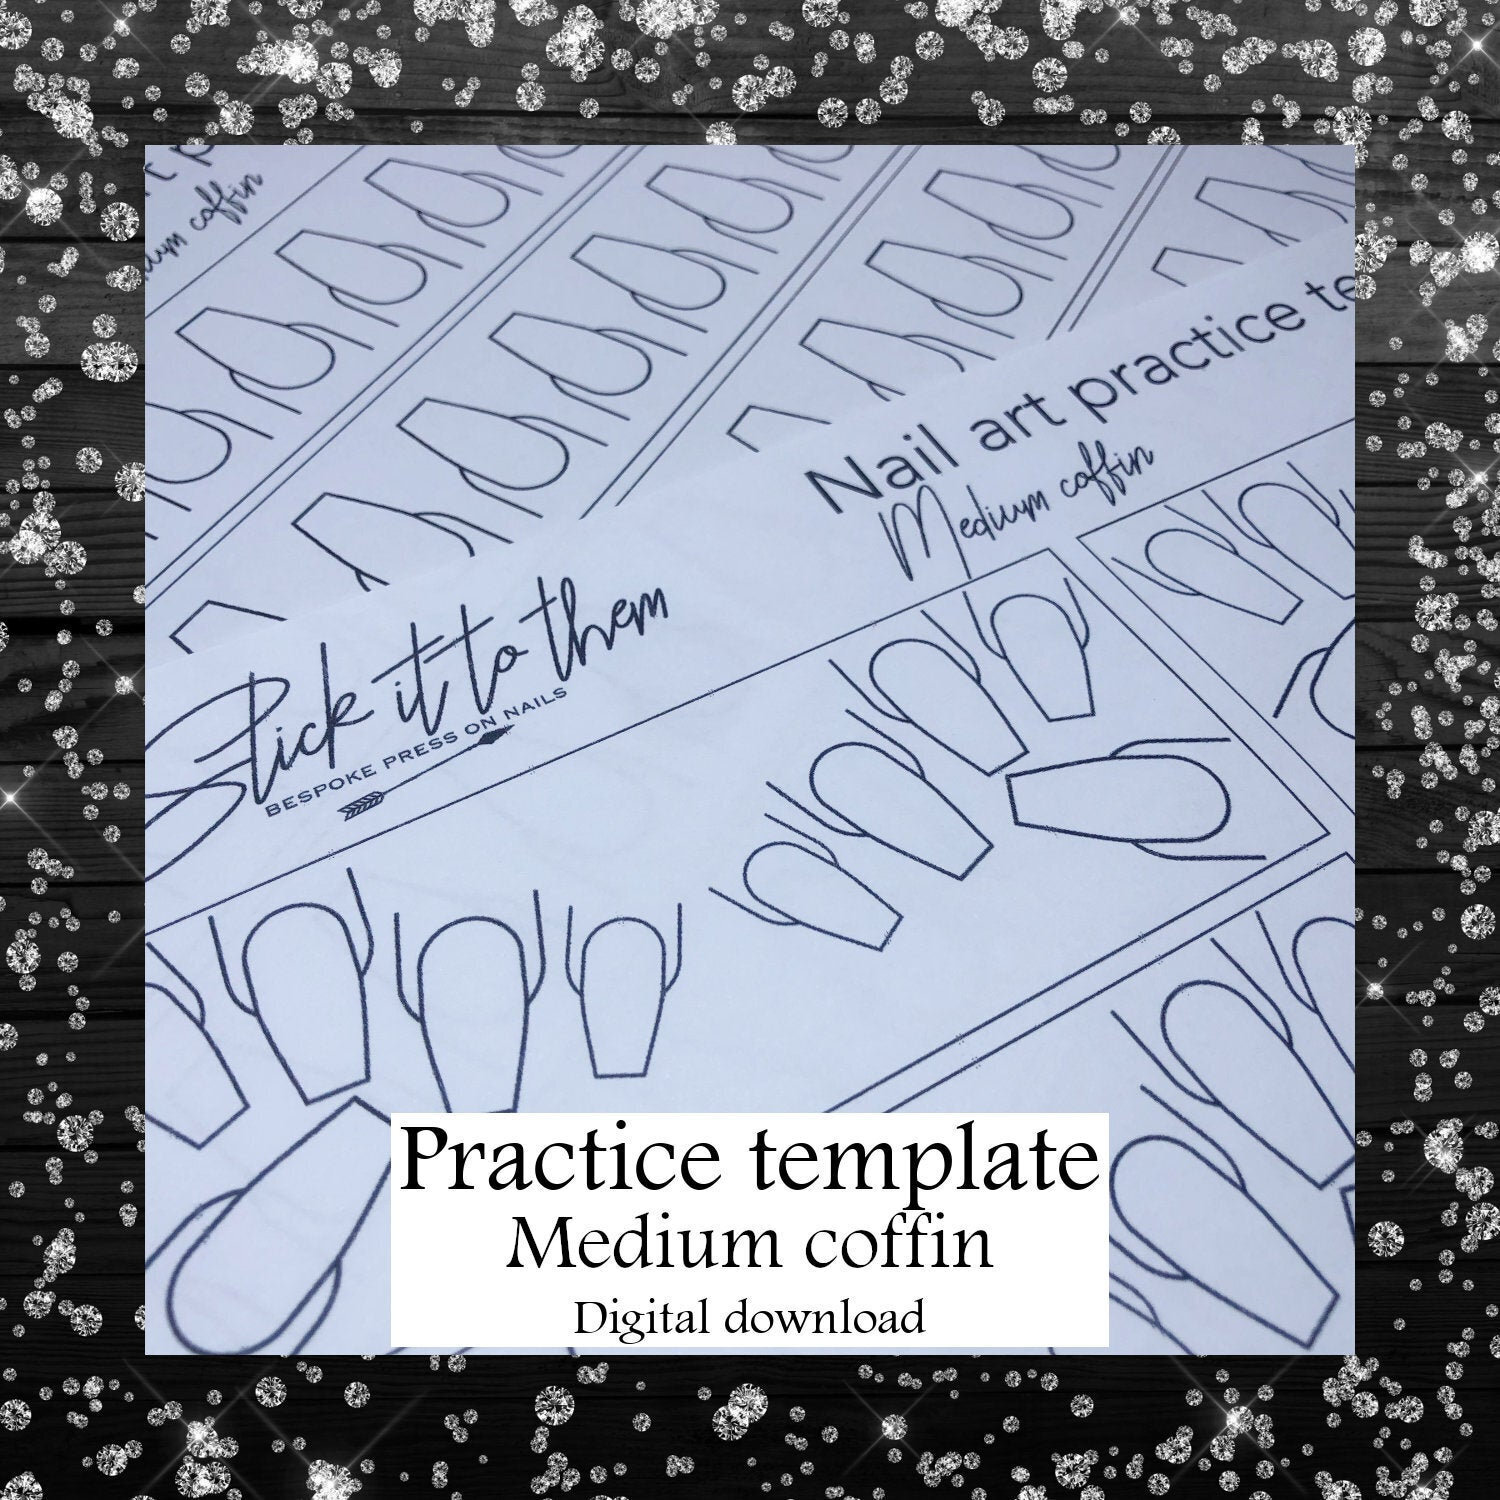 Practice template MEDIUM COFFIN - DIGITAL DOWNLOAD - Print your own nail art practice sheets!